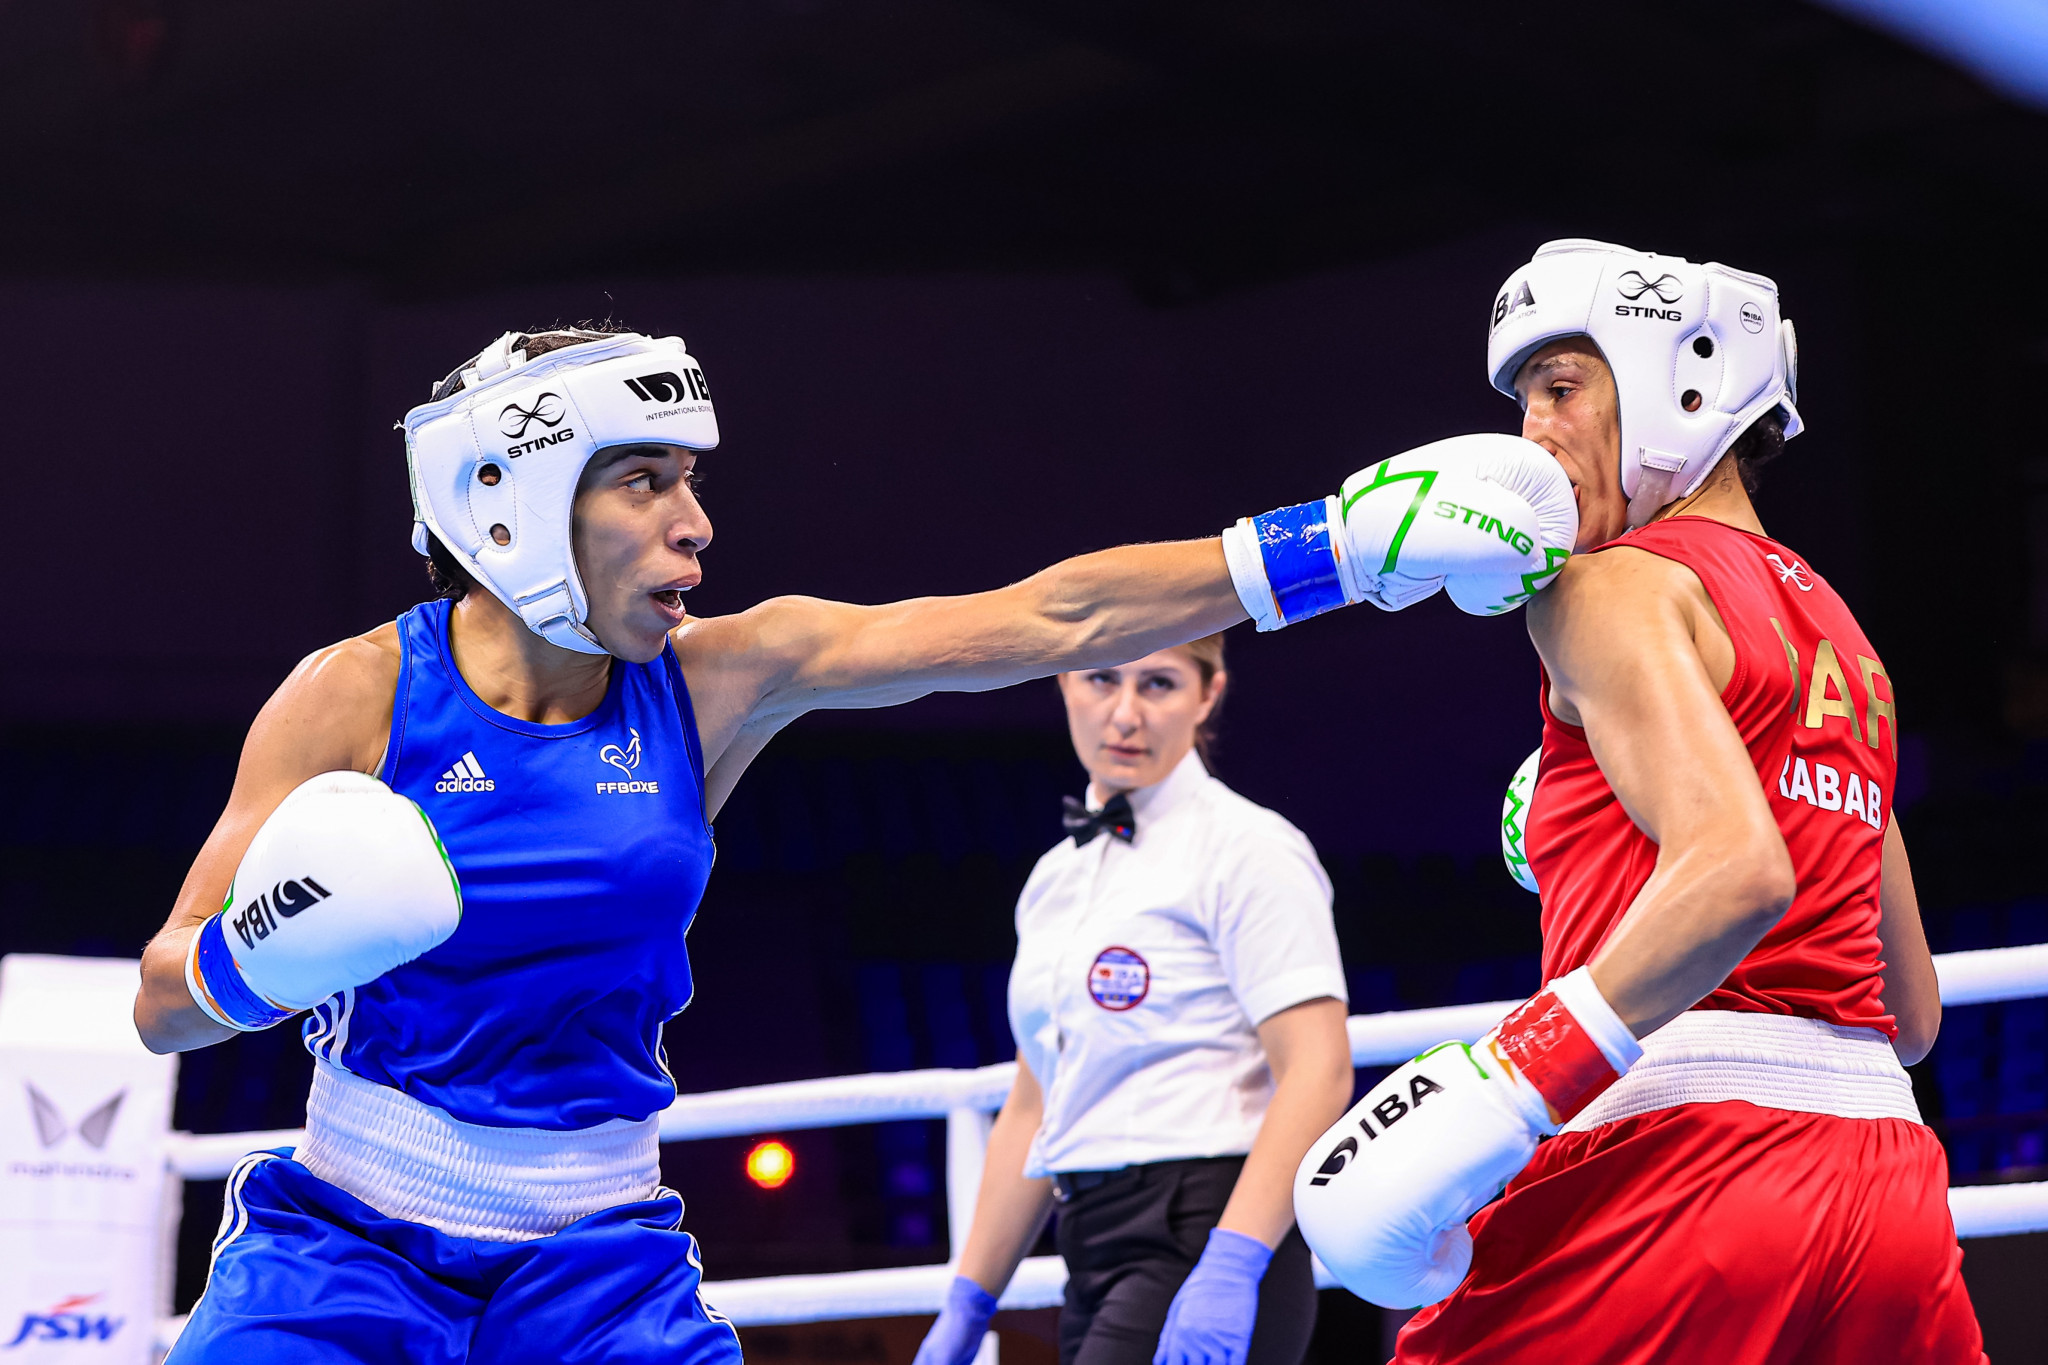 Wassila Lkhadiri defeated Rabab Cheddar of Morocco to ensure a medal for France in New Delhi ©IBA